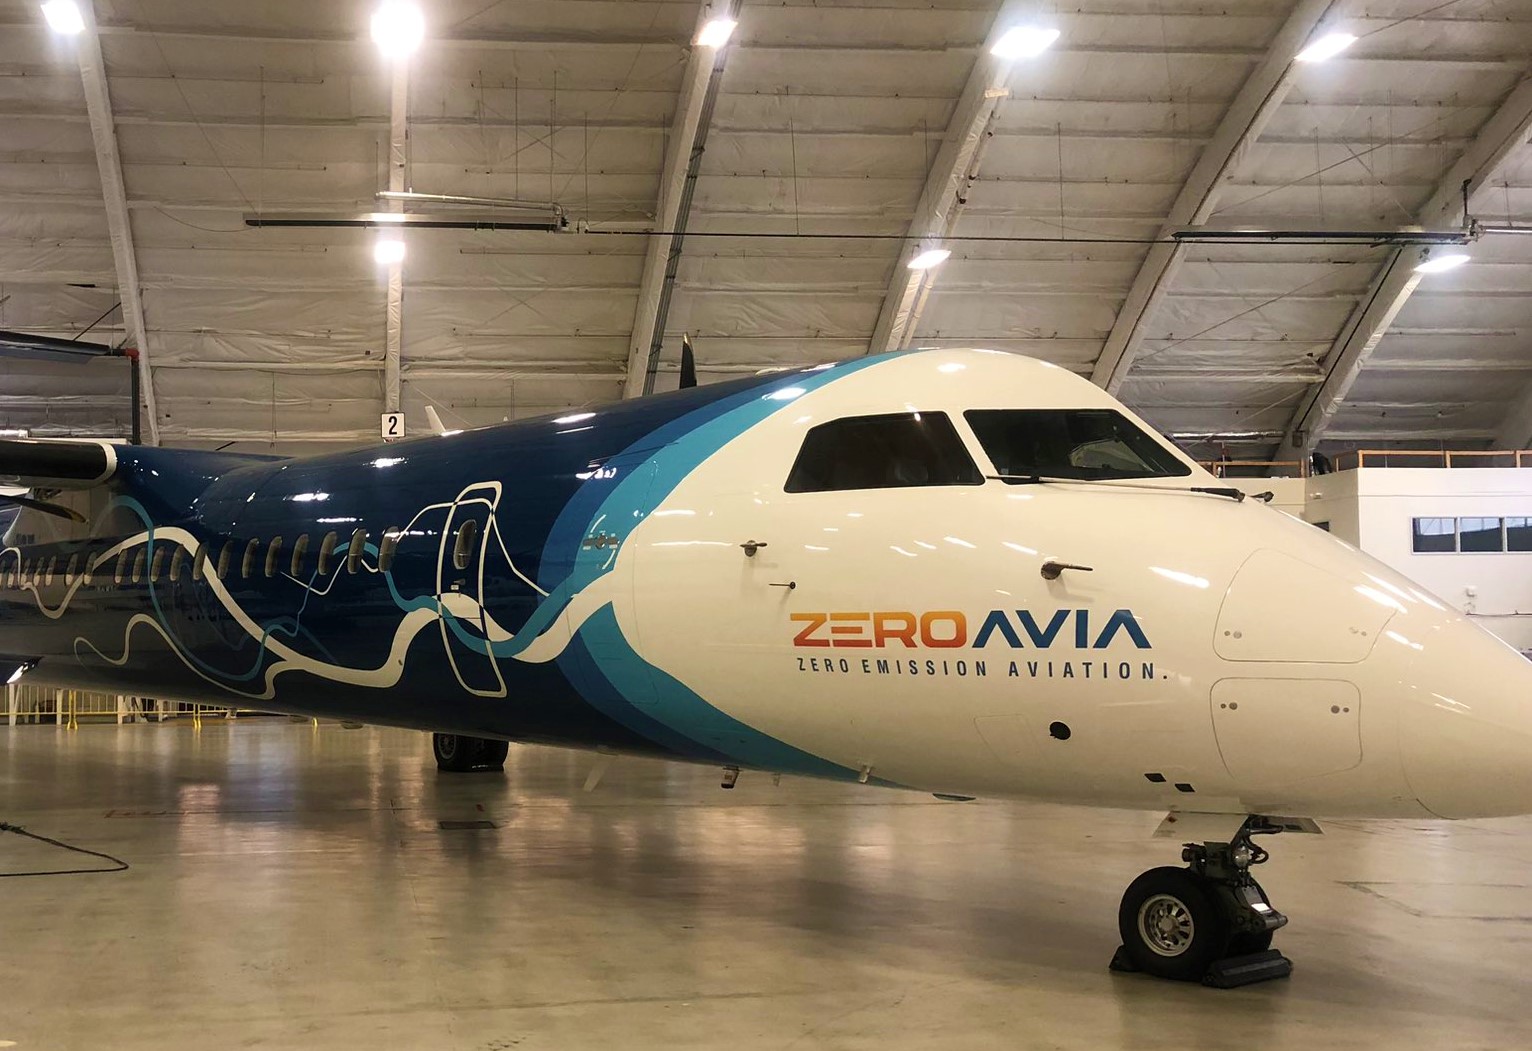 The  New  Alaska Airlines-ZeroAvia  Zero  Emissions aircraft , Based on the Horizon Air DHC-8 402  Unveiled  Today.